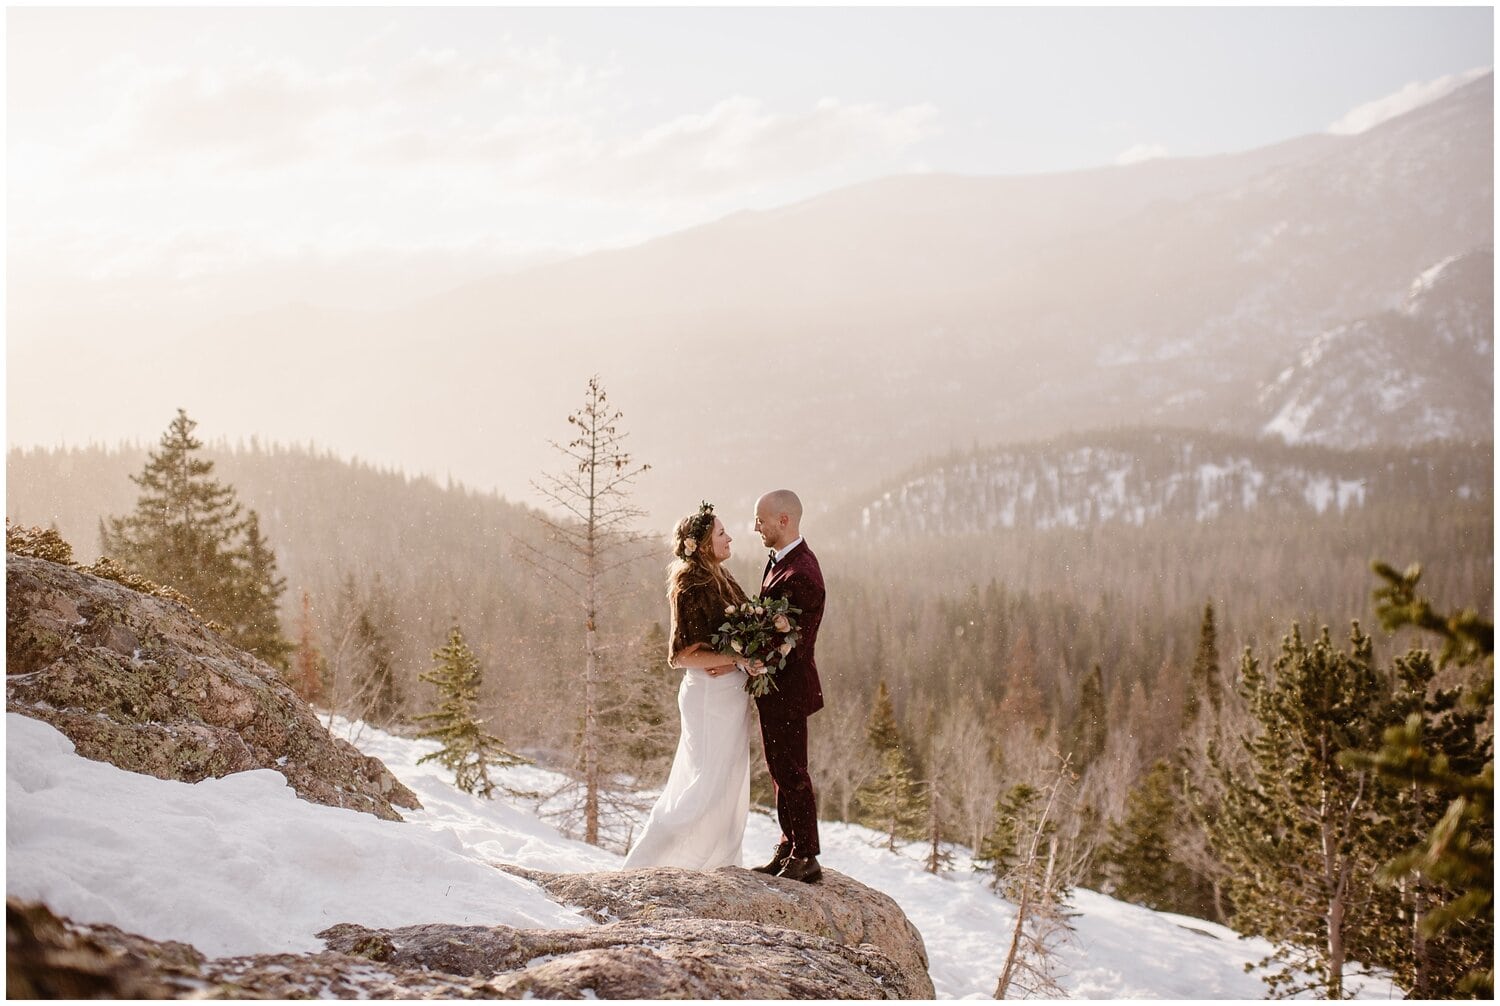 Bride and groom look into each others eyes, surrounded by snow, trees, and mountains. 